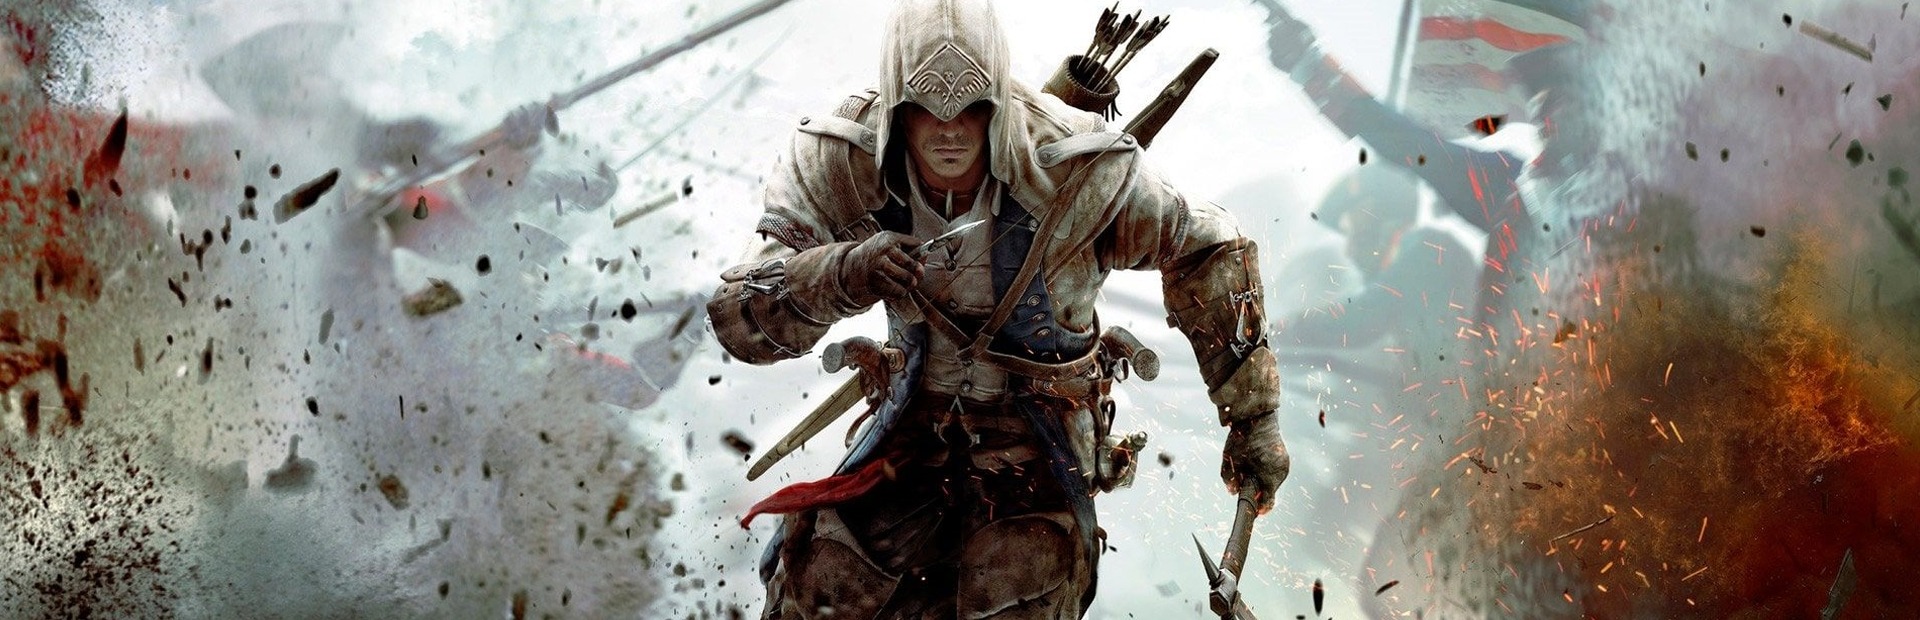 Banner Assassin's Creed III Deluxe Edition